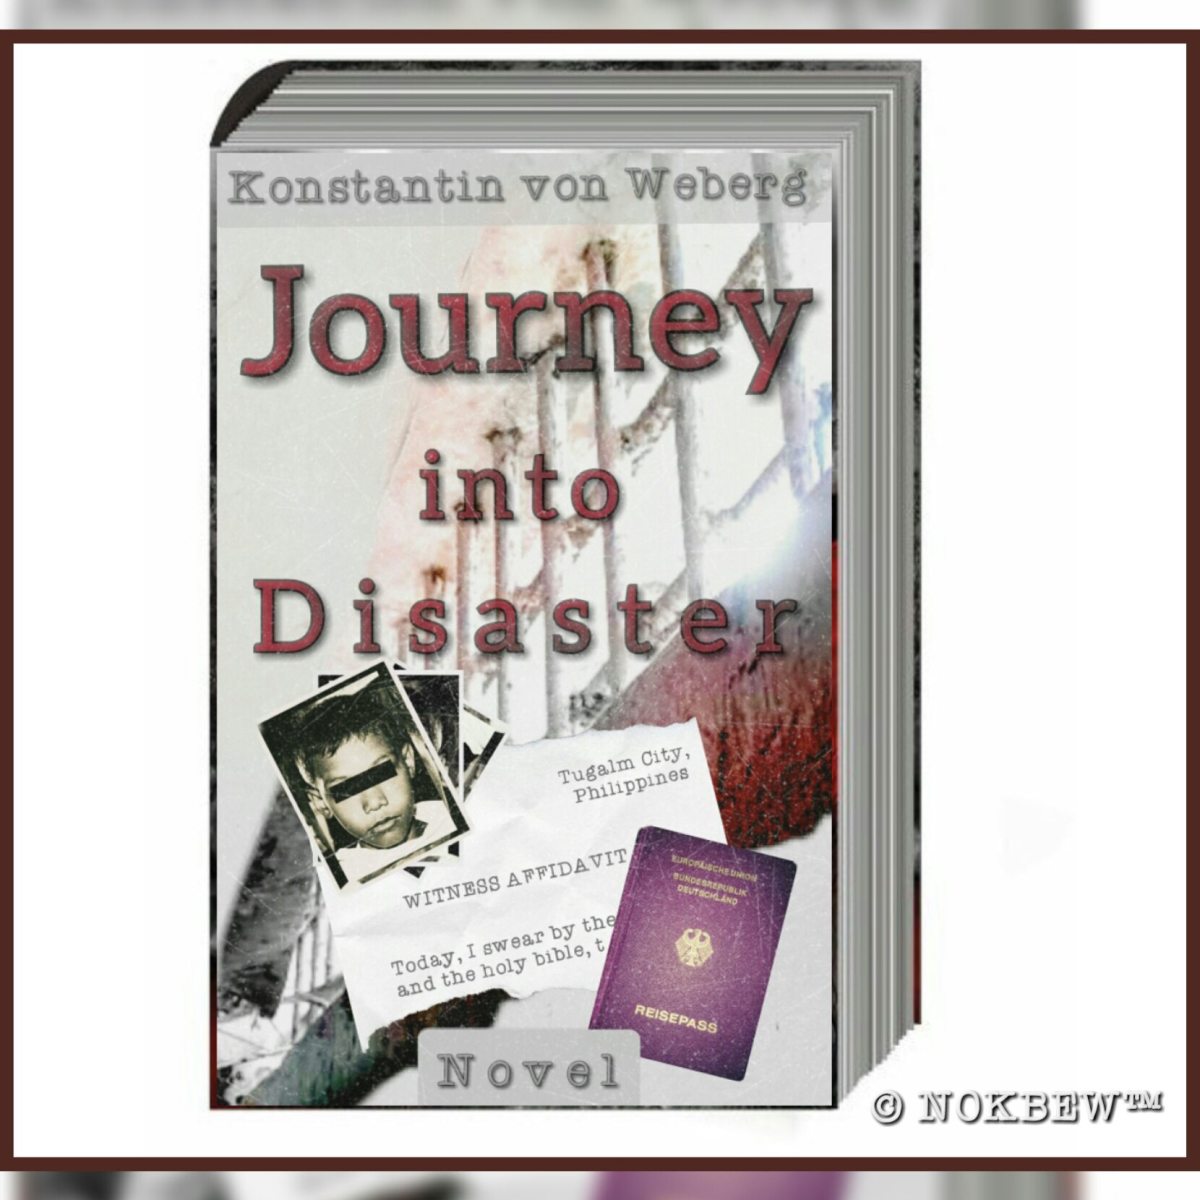 »Journey into Disaster« and Amazon’s Kindle!